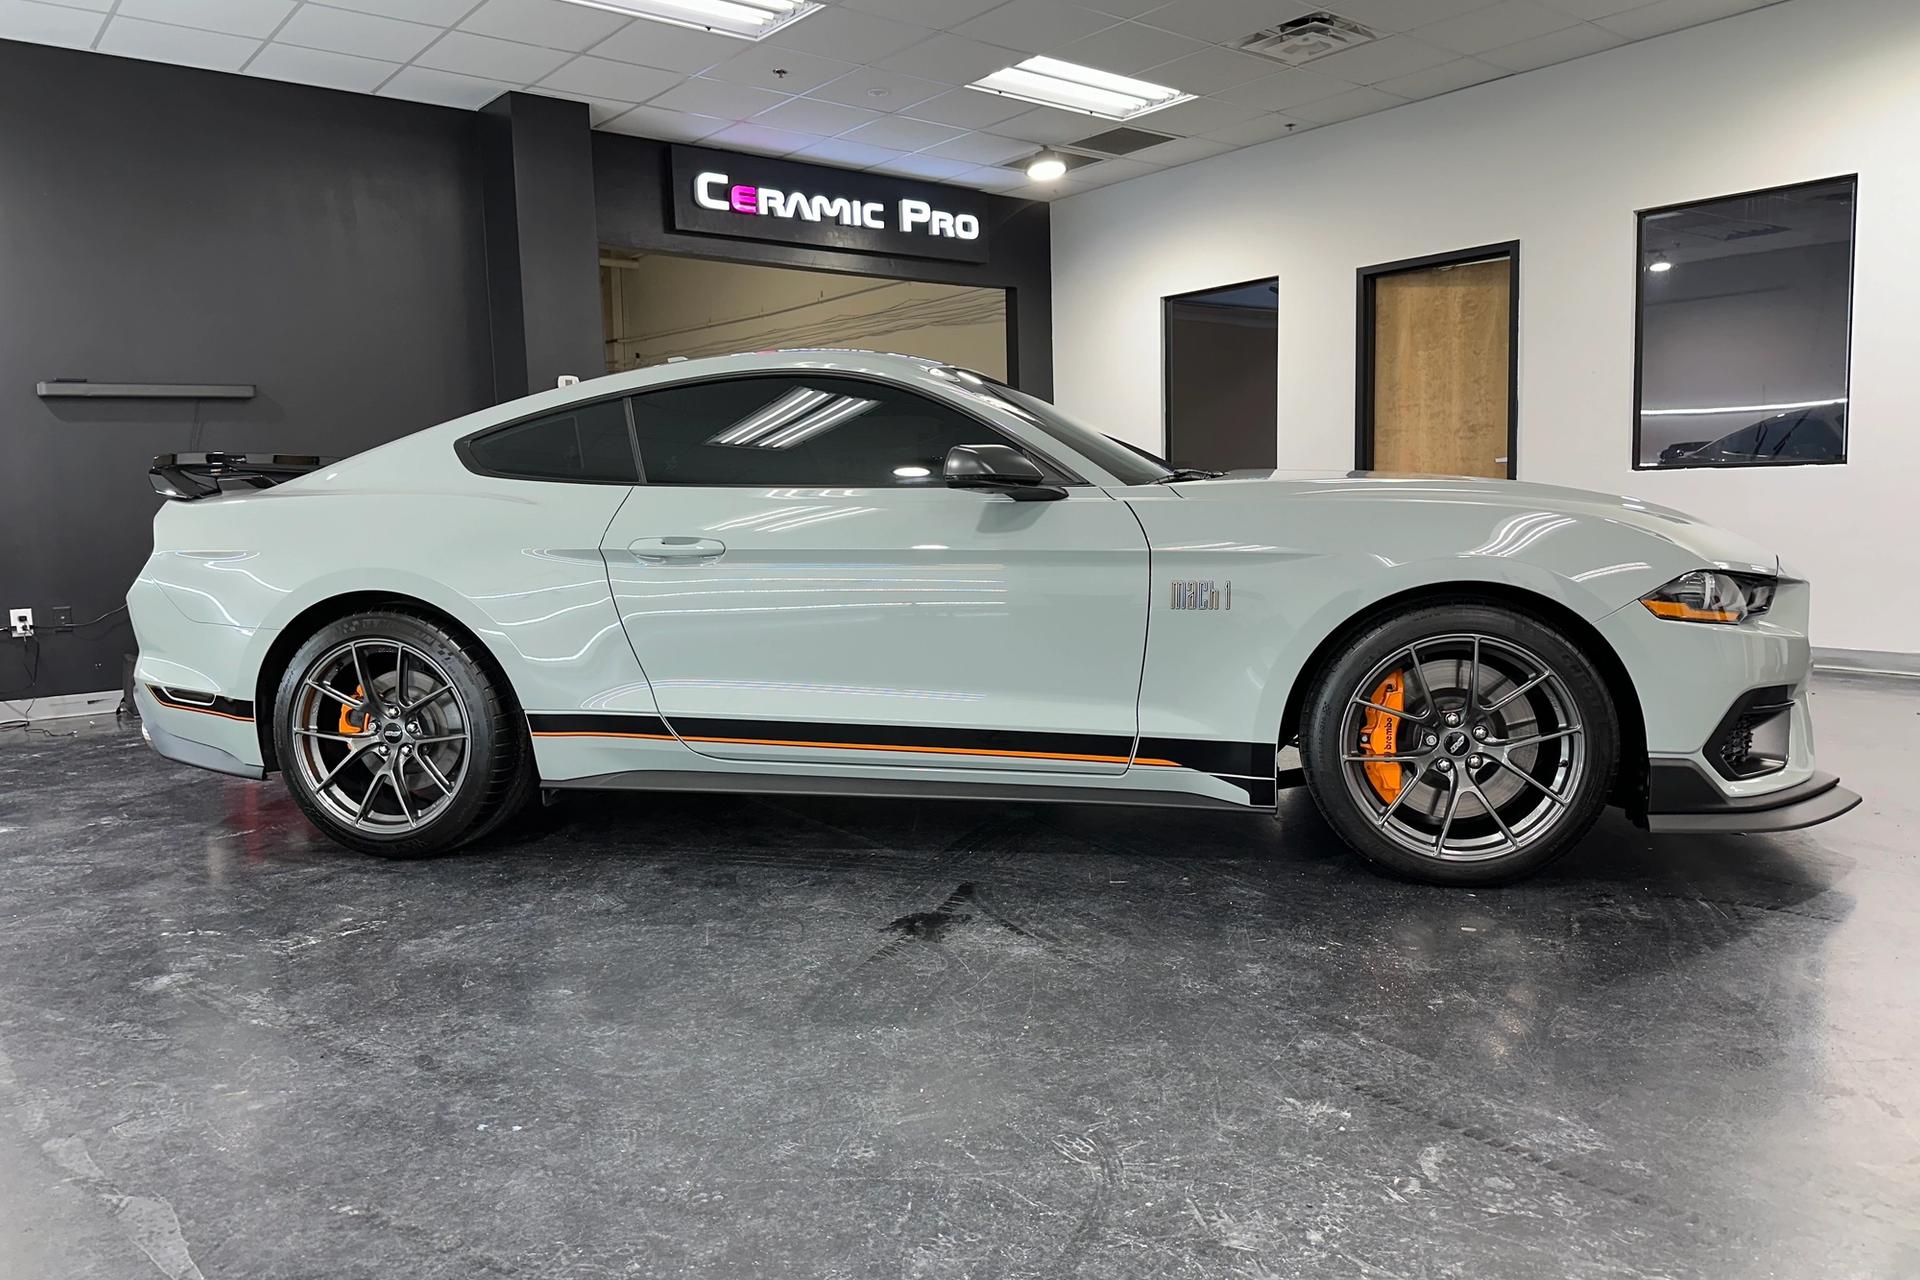 Ford S550 Mustang Mach 1 with 19" VS-5RS in Anthracite